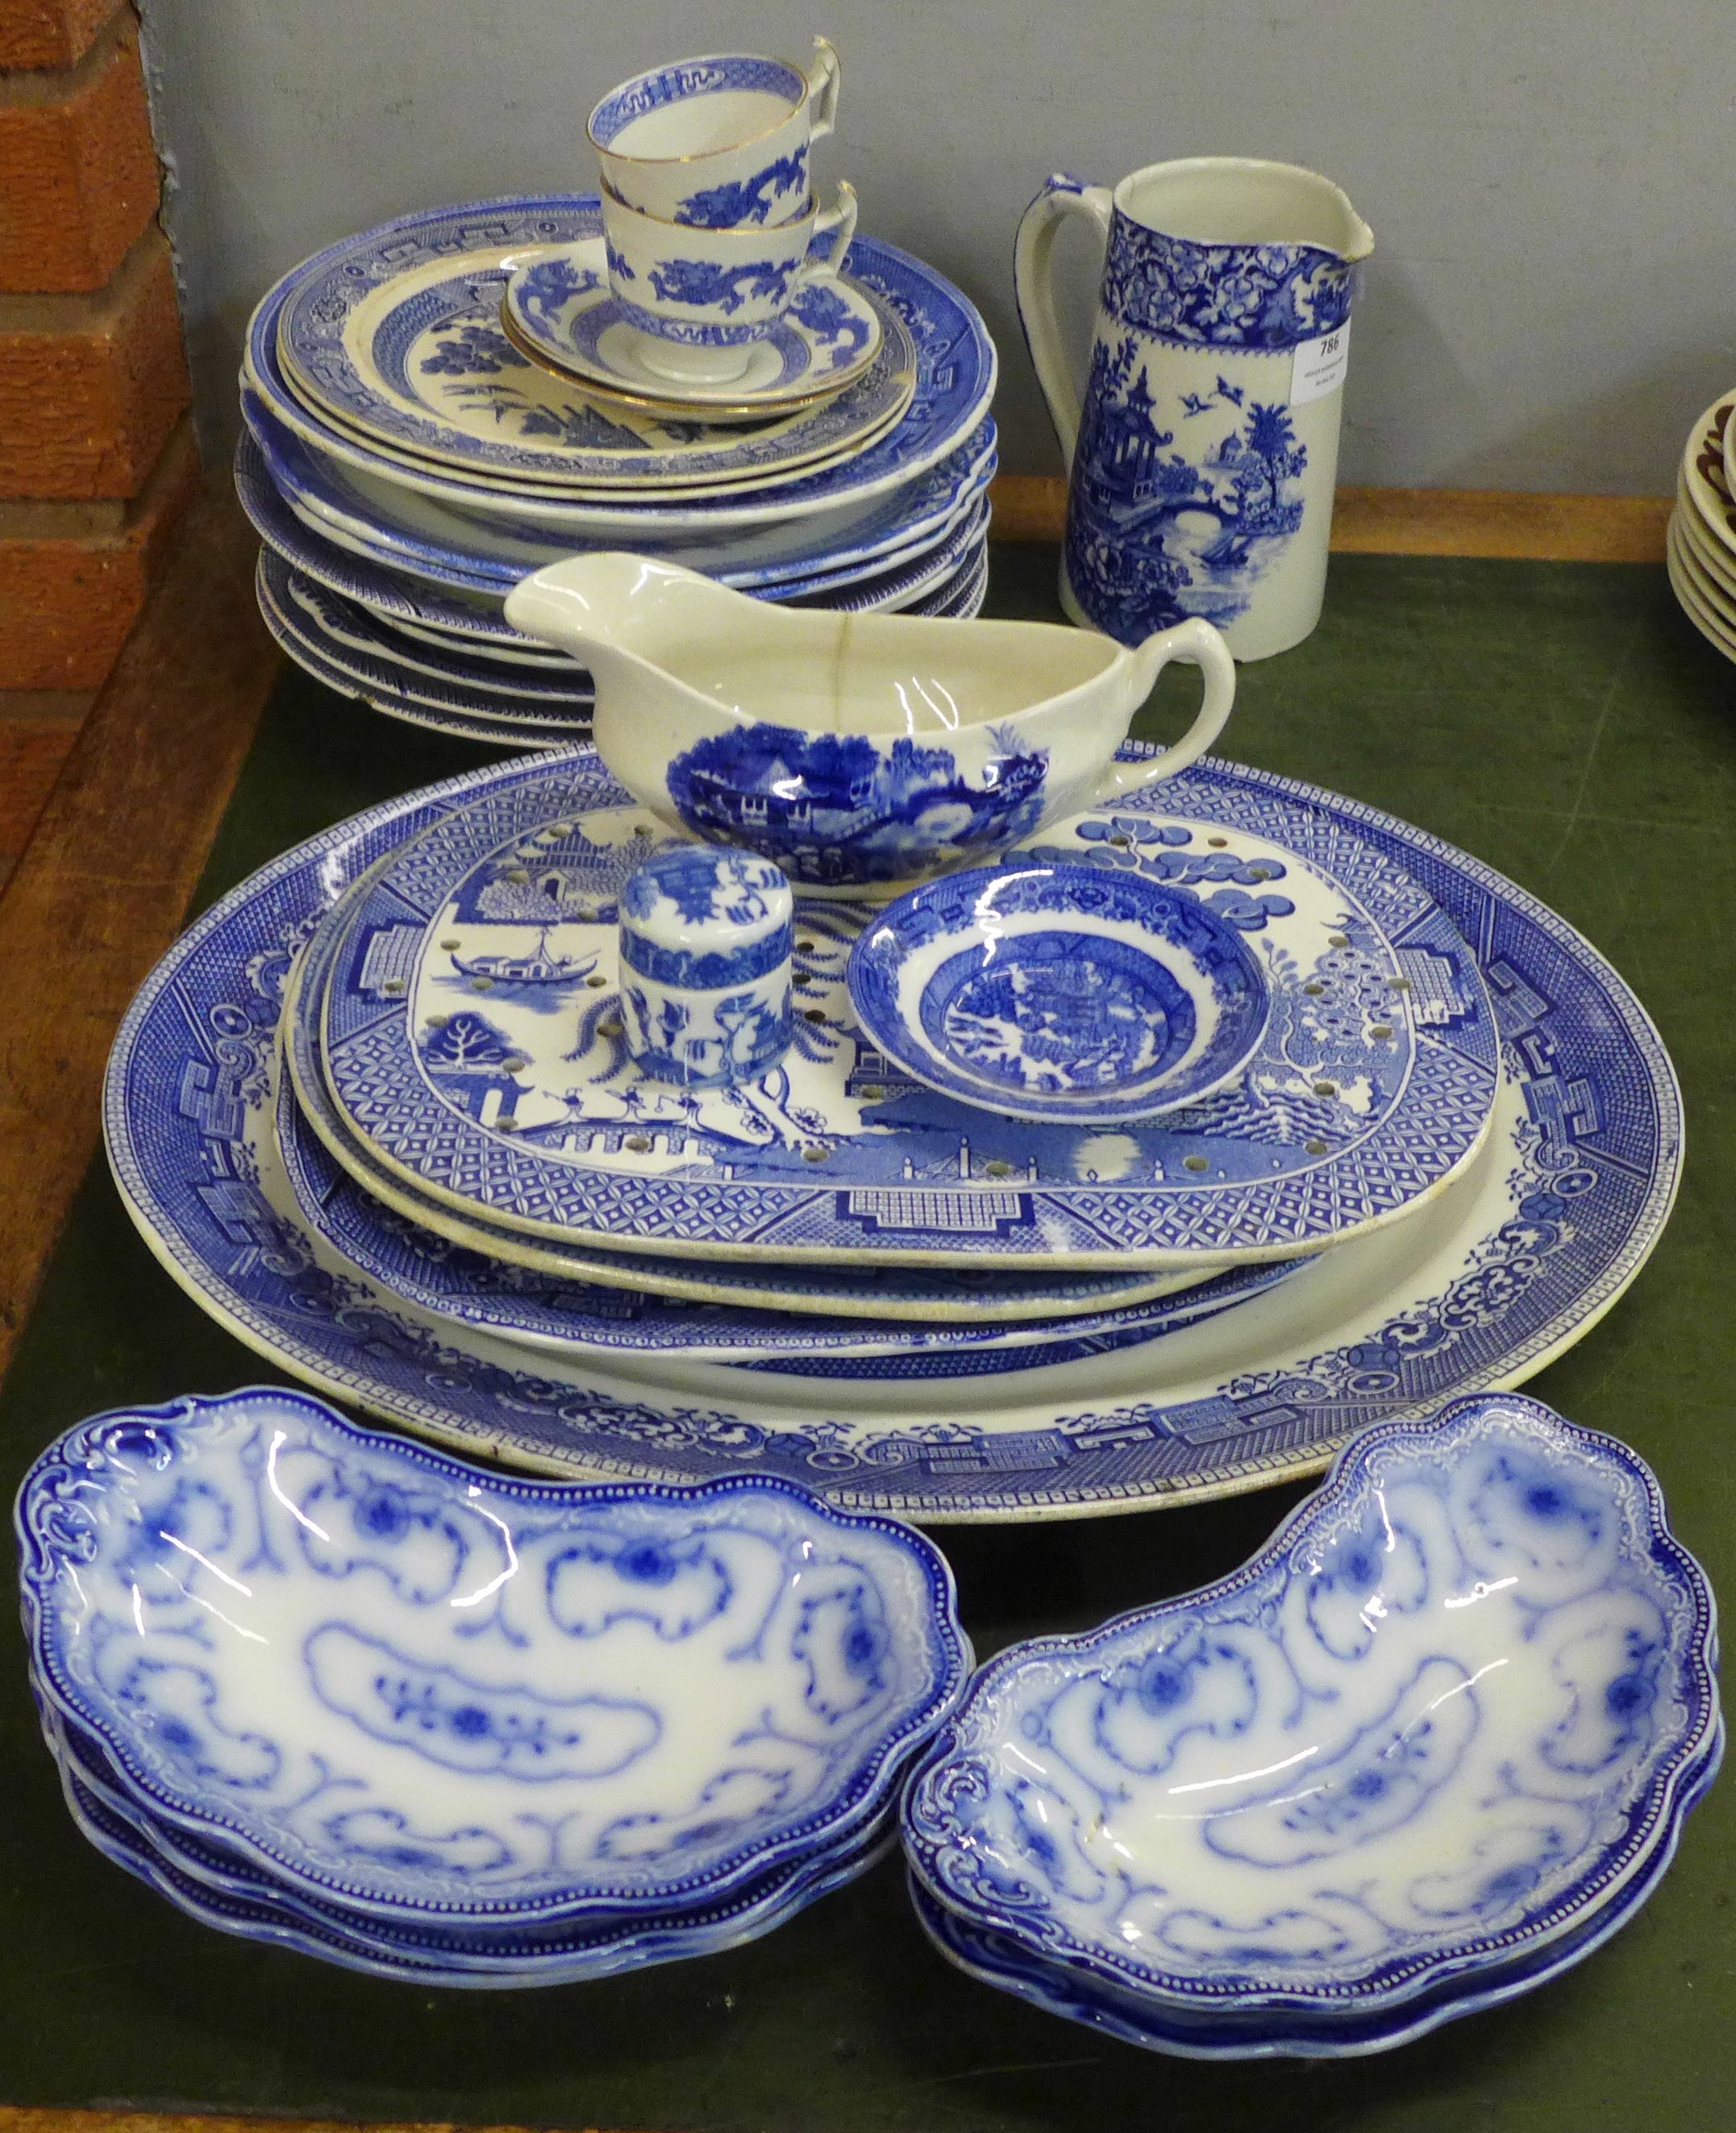 Assorted blue and white china, mainly Willow pattern, twenty-five pieces